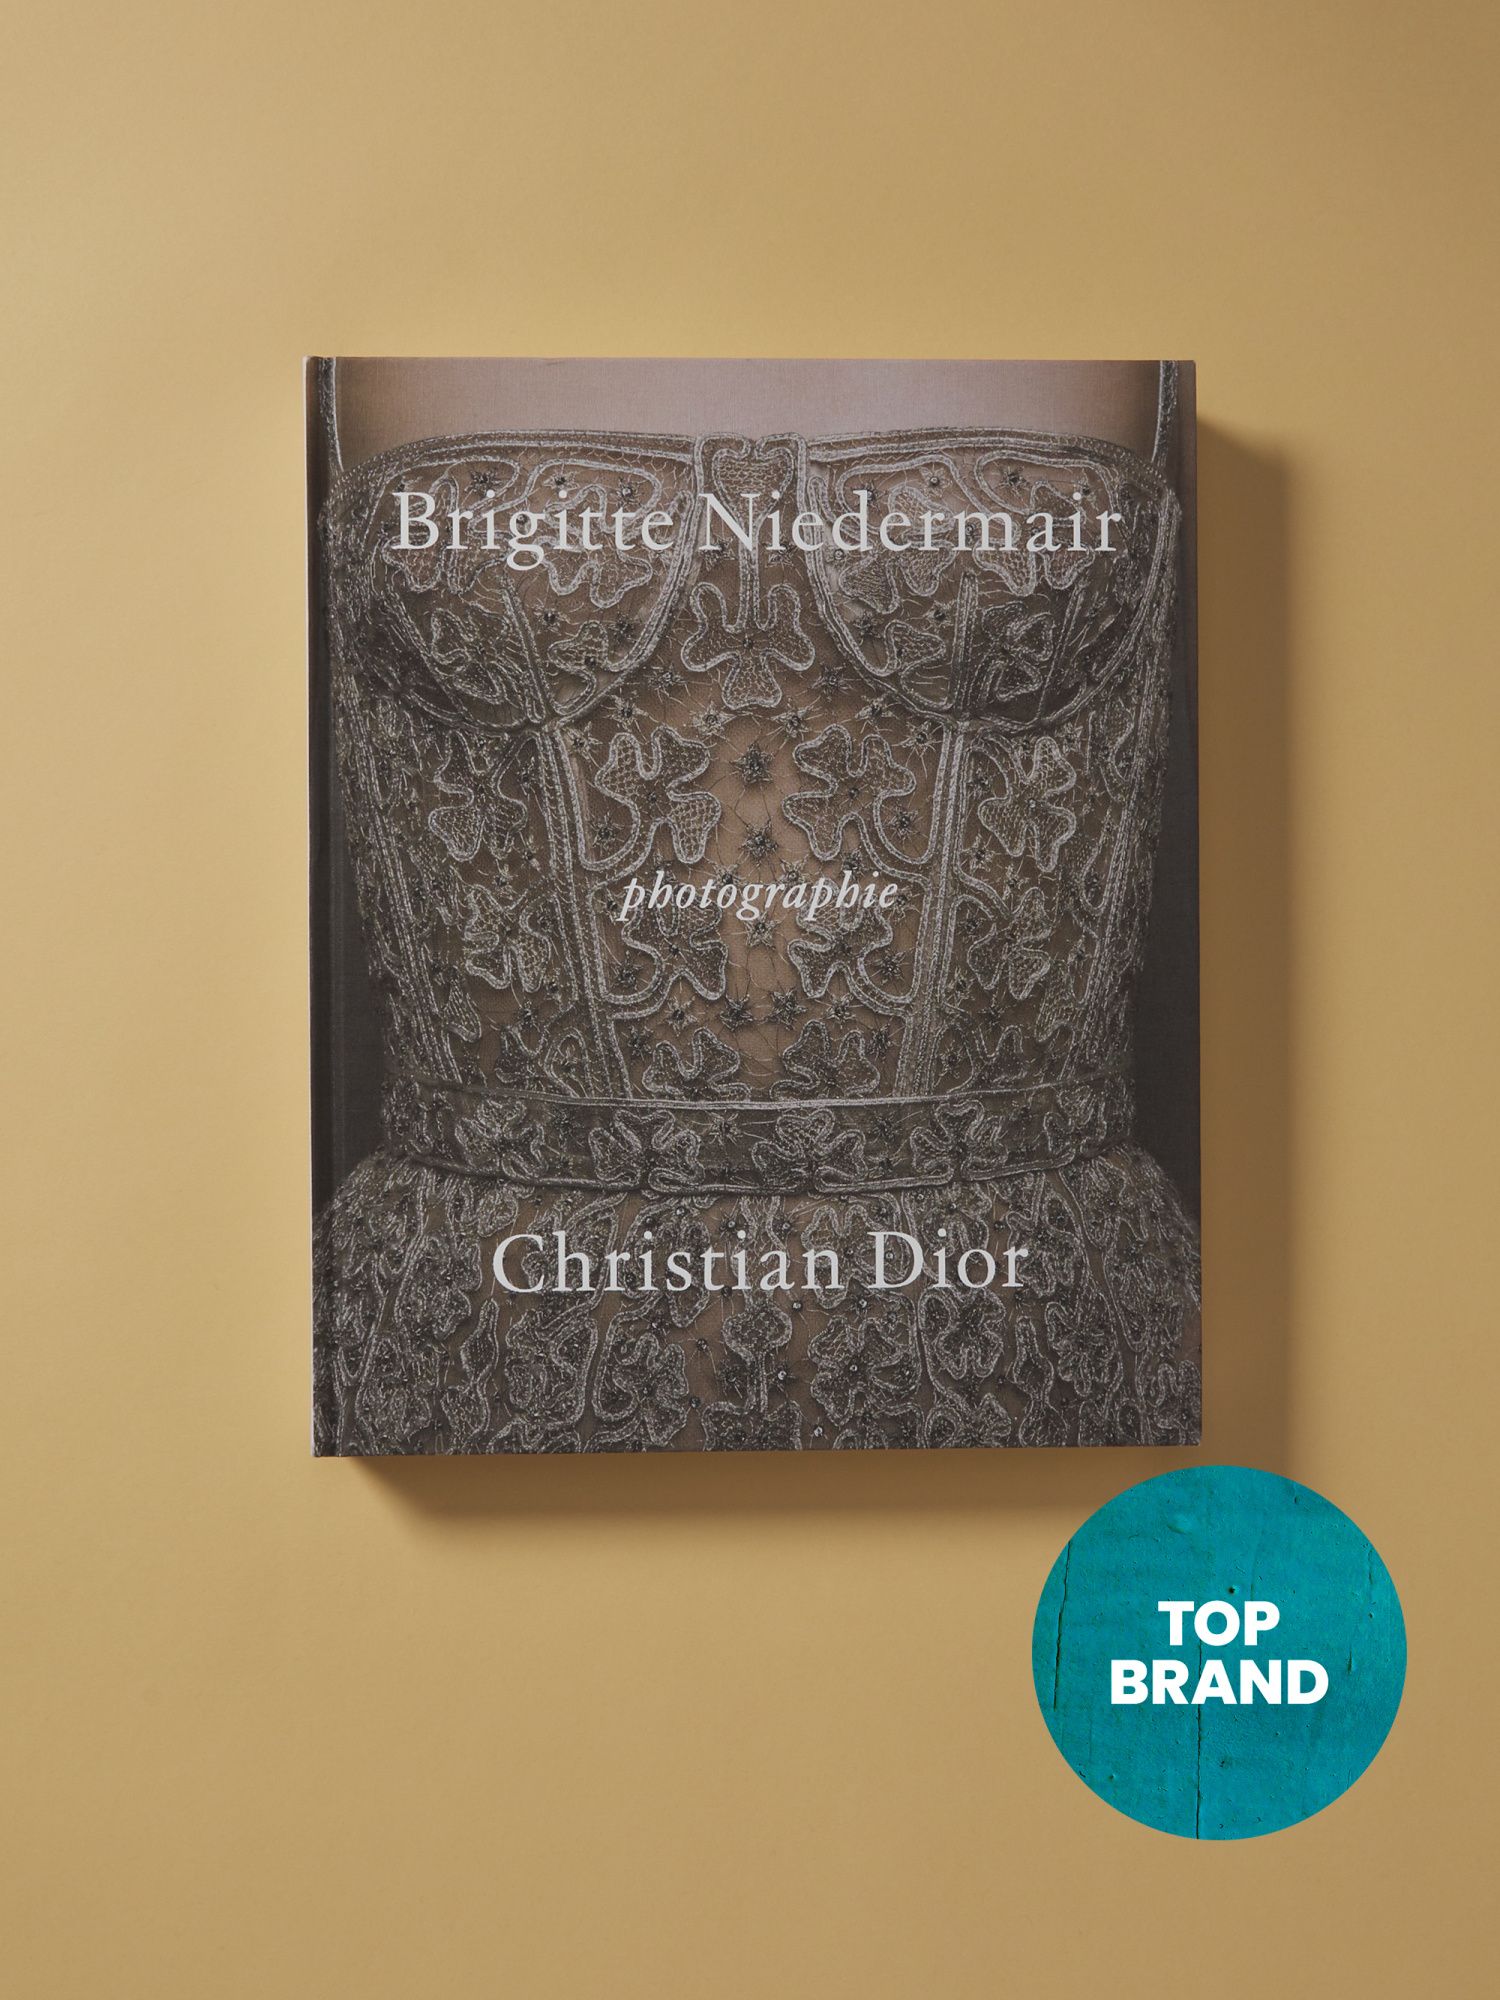 Made In Germany Photographie: Christian Dior Coffee Table Book | Decorative Accents | HomeGoods | HomeGoods